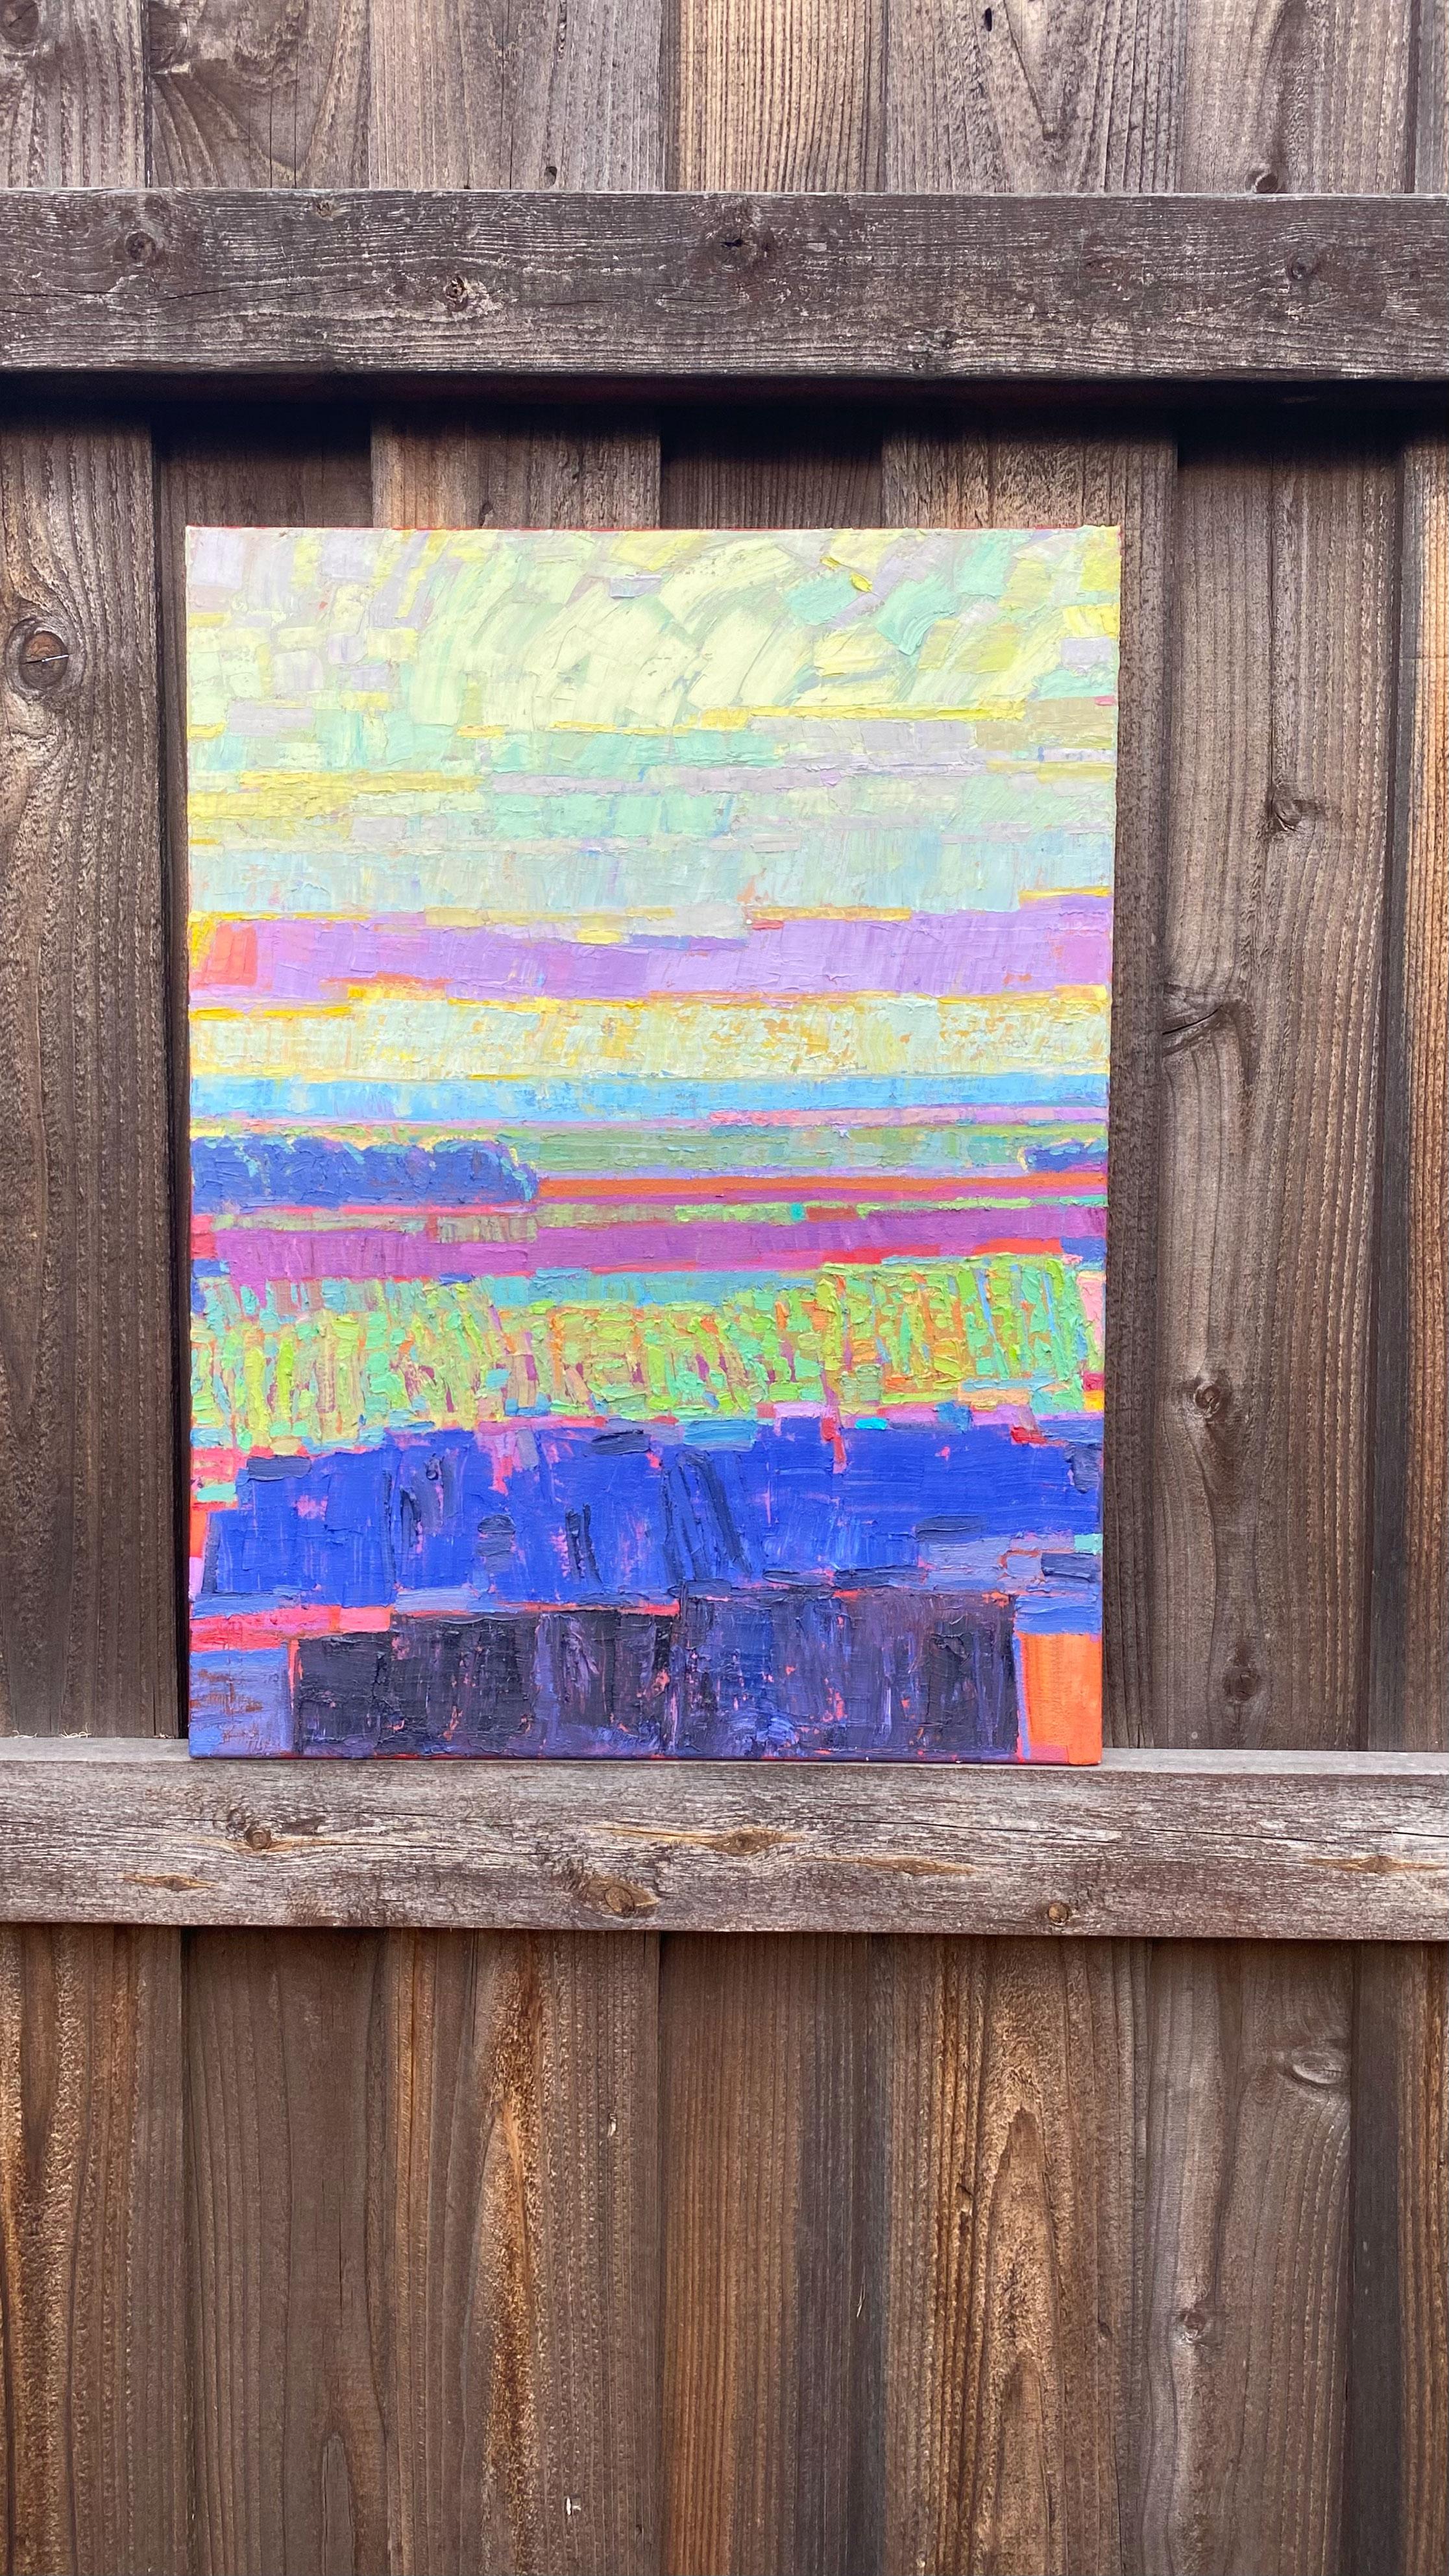 <p>Artist Comments<br>Inspired by vast open fields, mountains, and horizons that end in skies, artist Srinivas Kathoju builds an abstract interpretation of a colorful landscape. The fields represent the foreground with thick paint imparting texture.